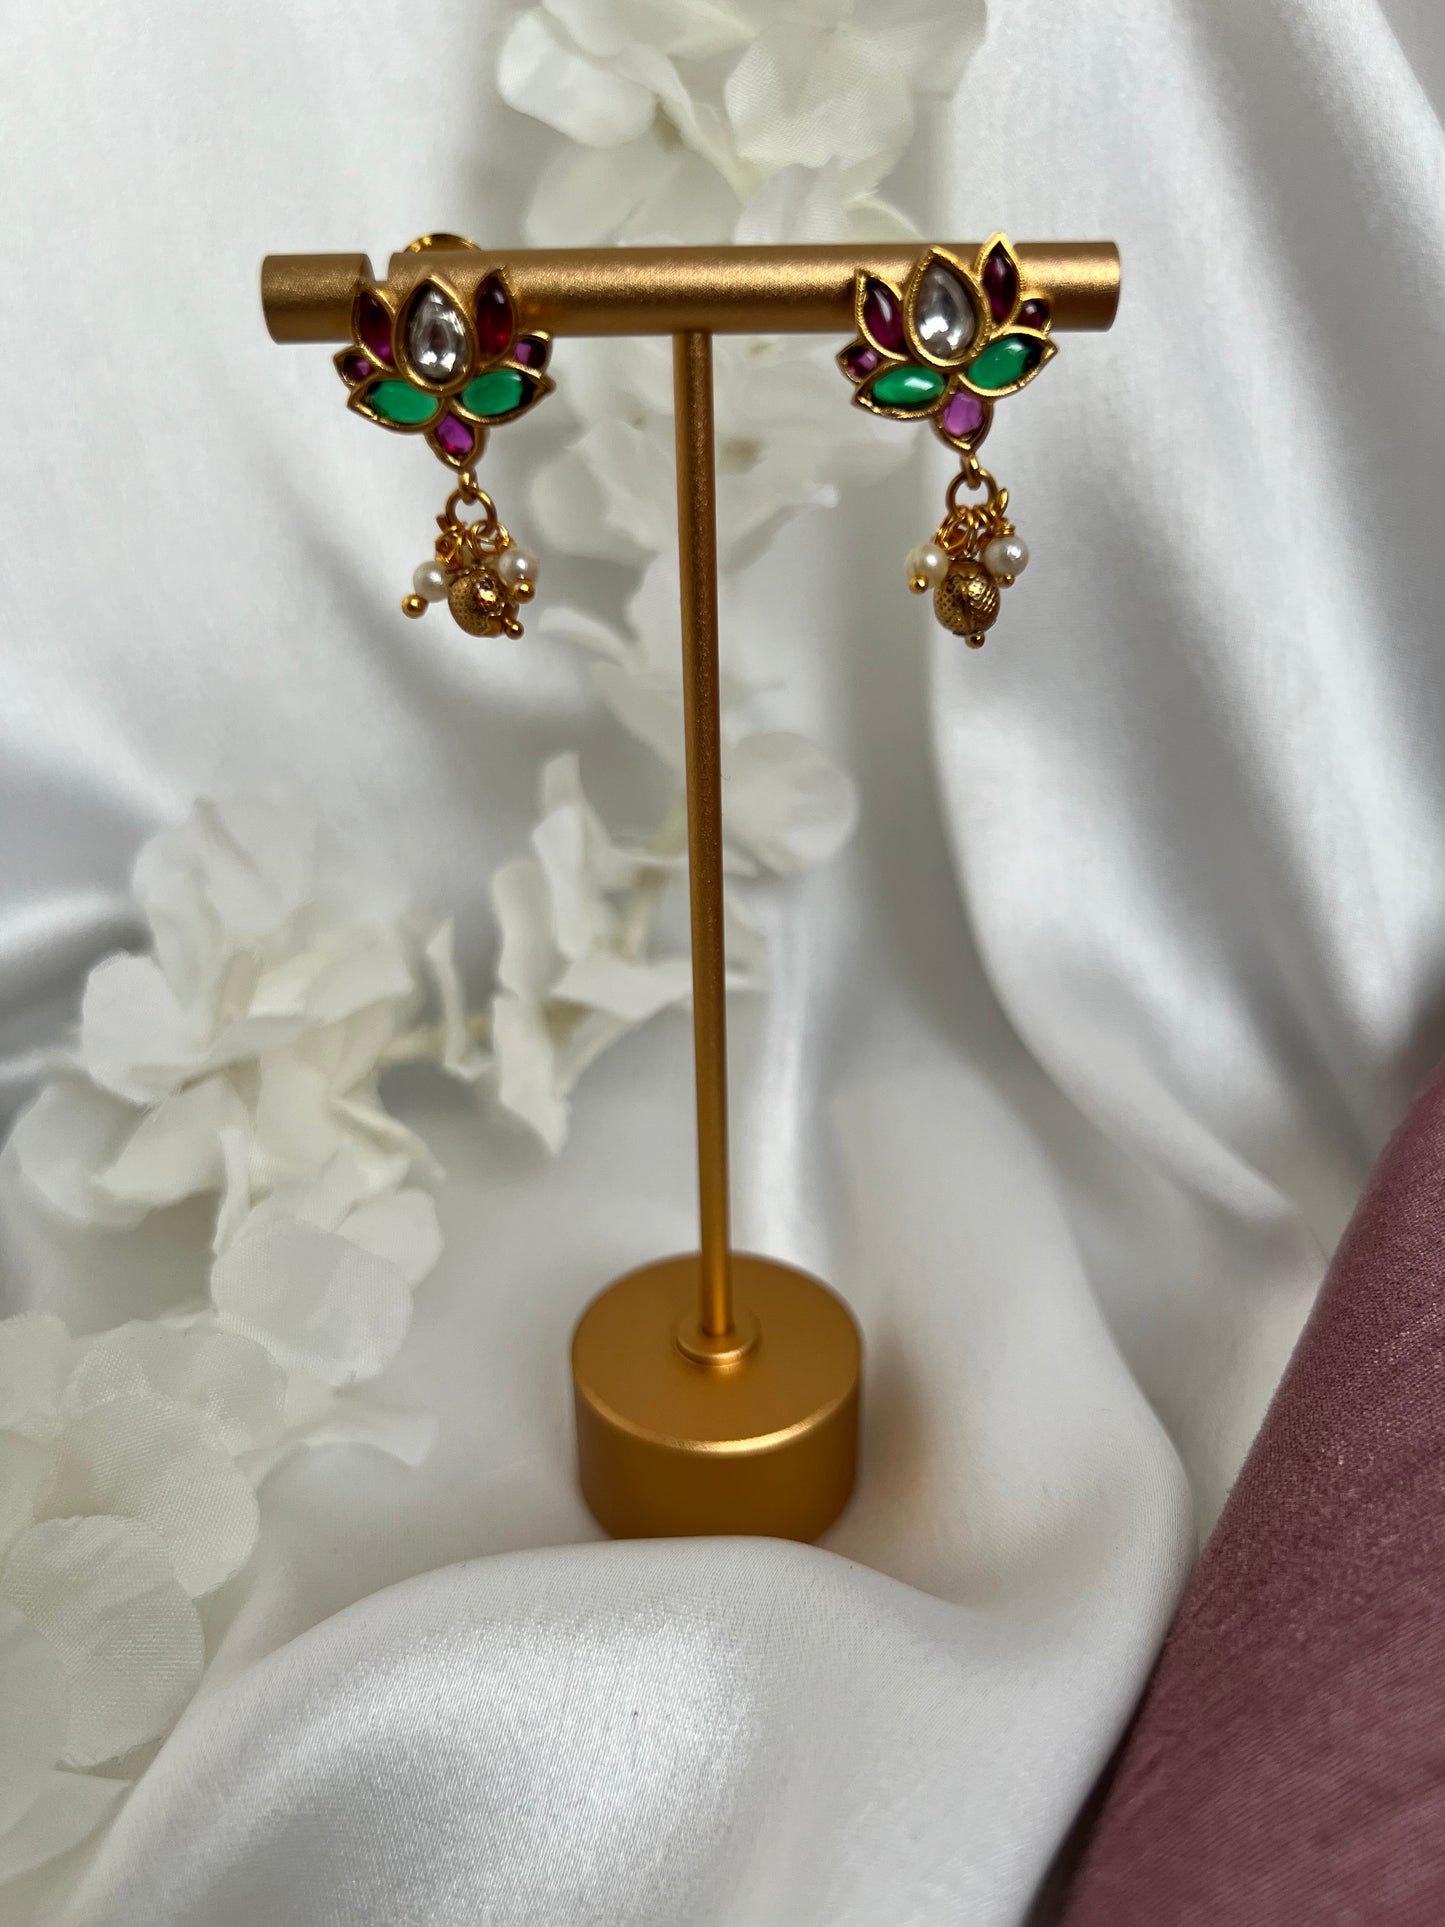 Small lotus rubygreen earrings with dangling white and golden pearls E3001